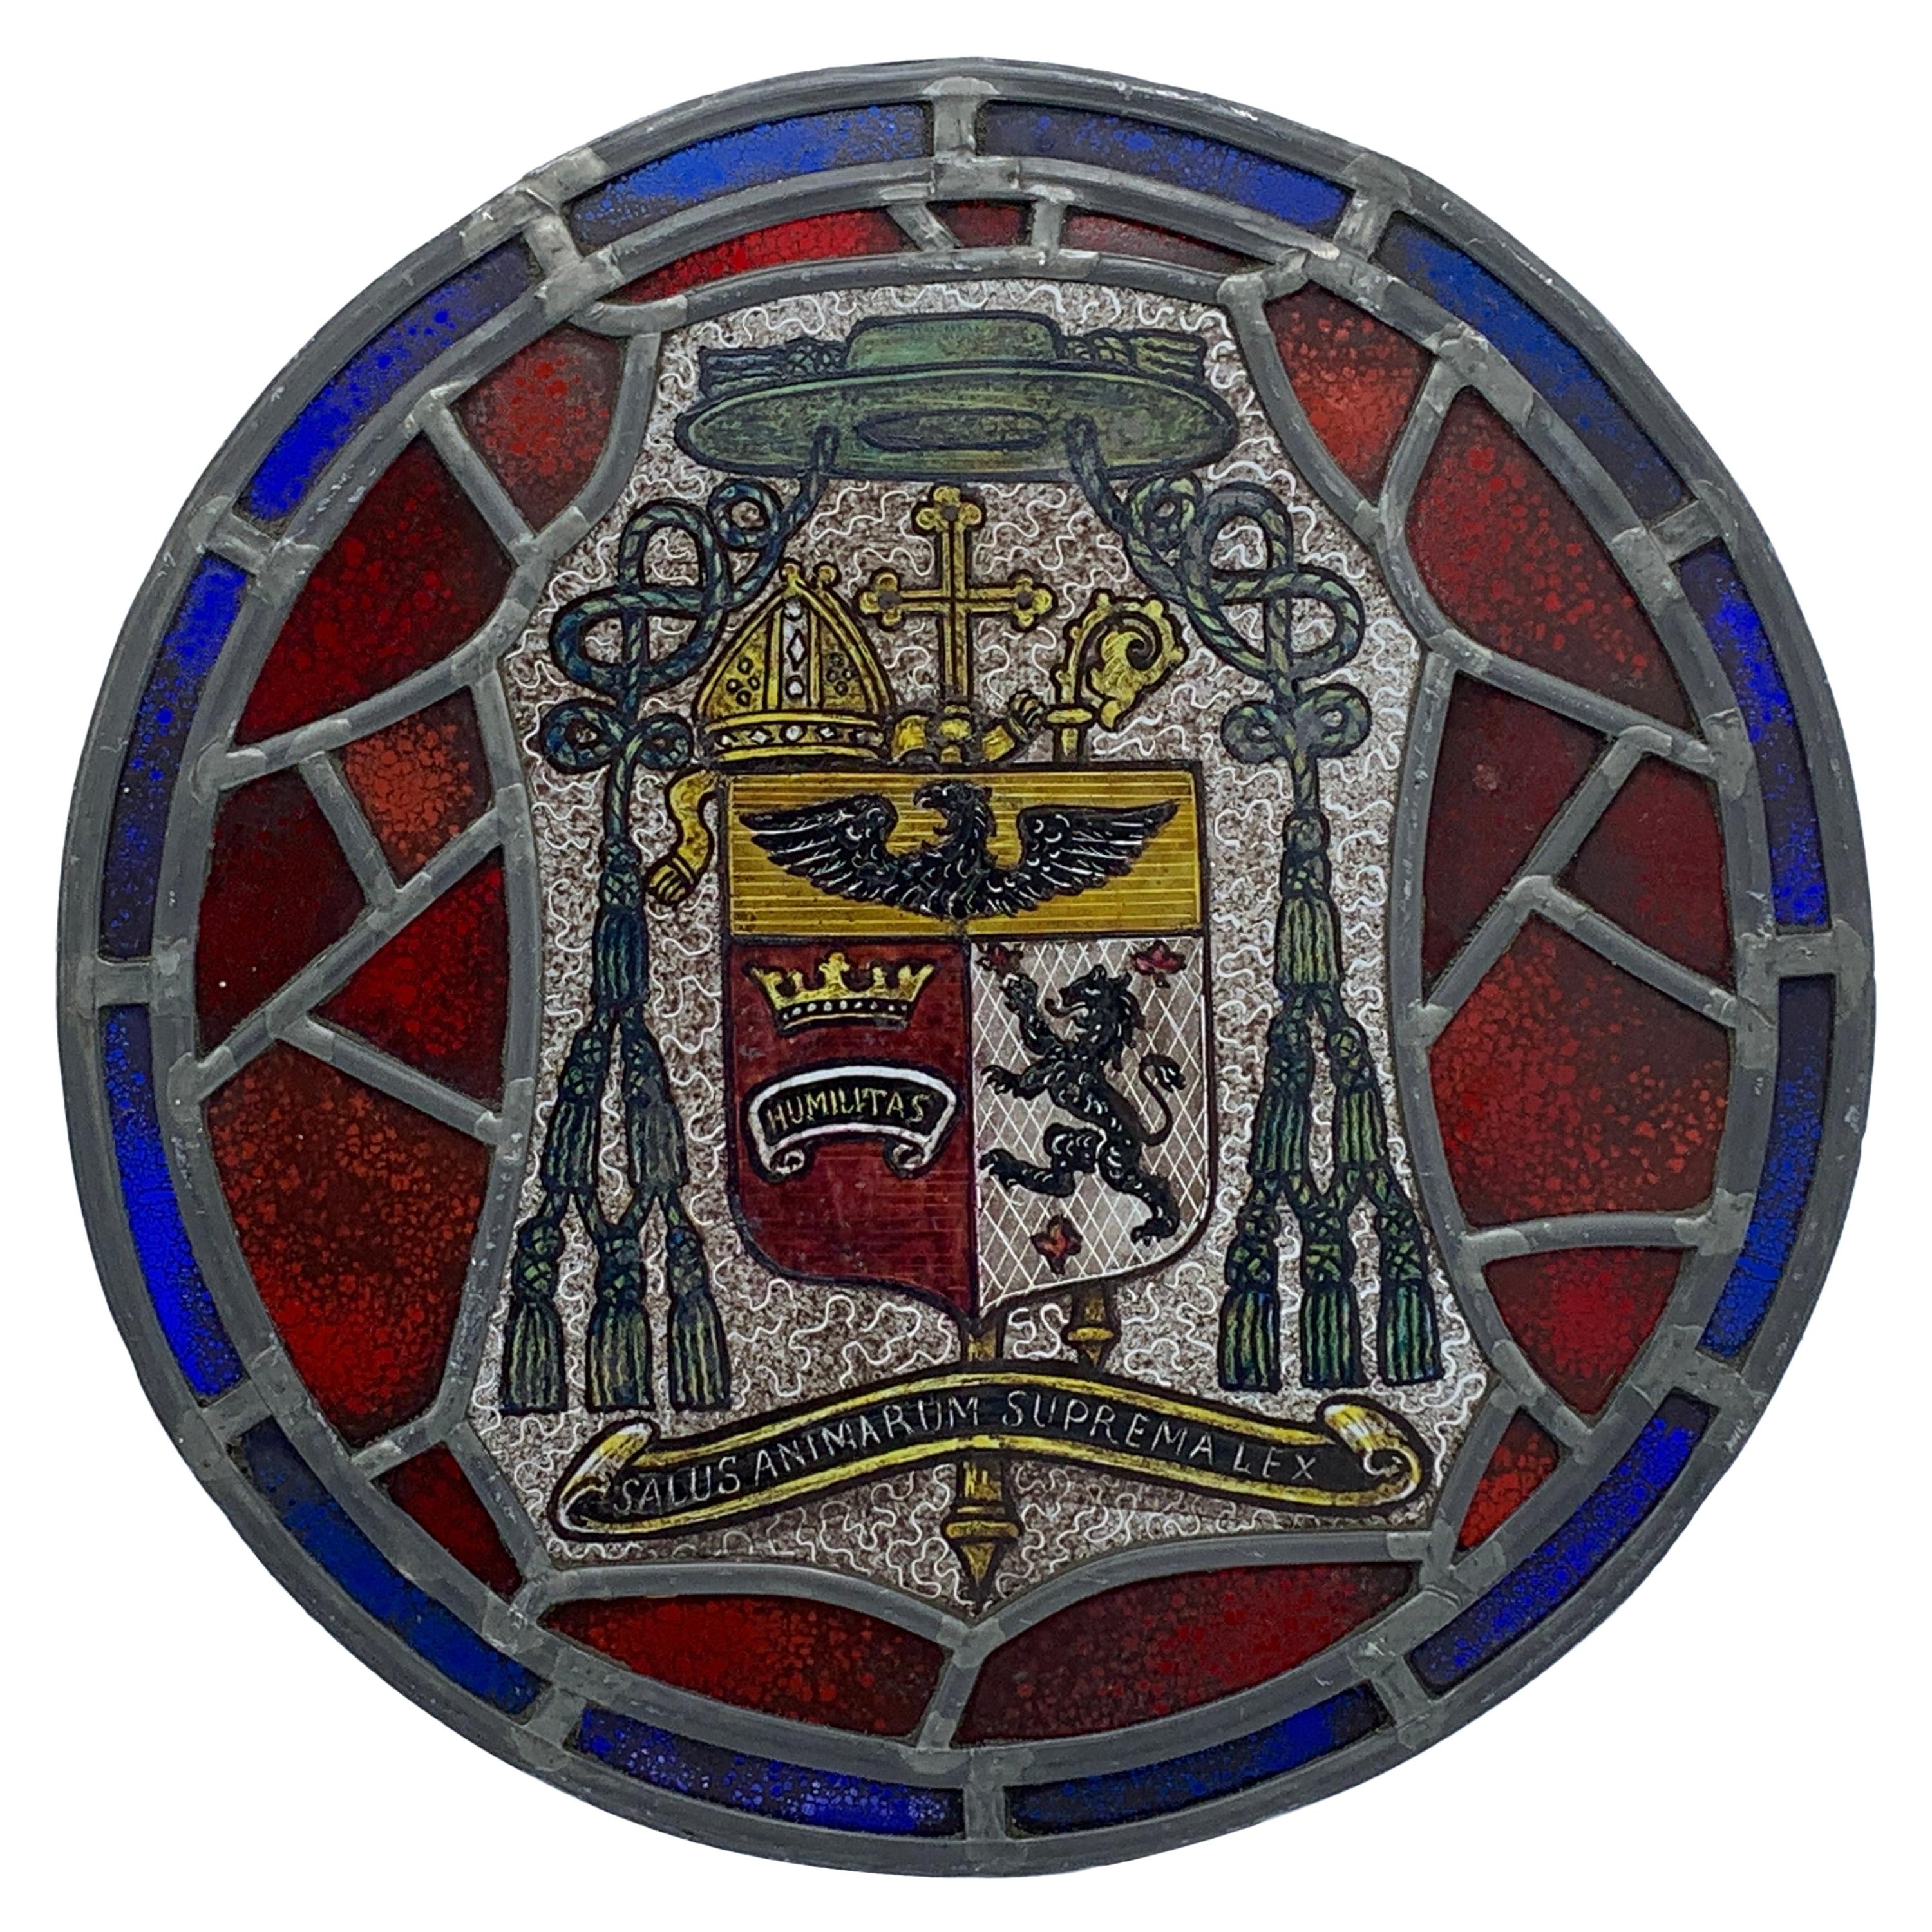 19th Century Stained Glass and Lead "Salus Animarum Suprema Lex" Crest Window For Sale